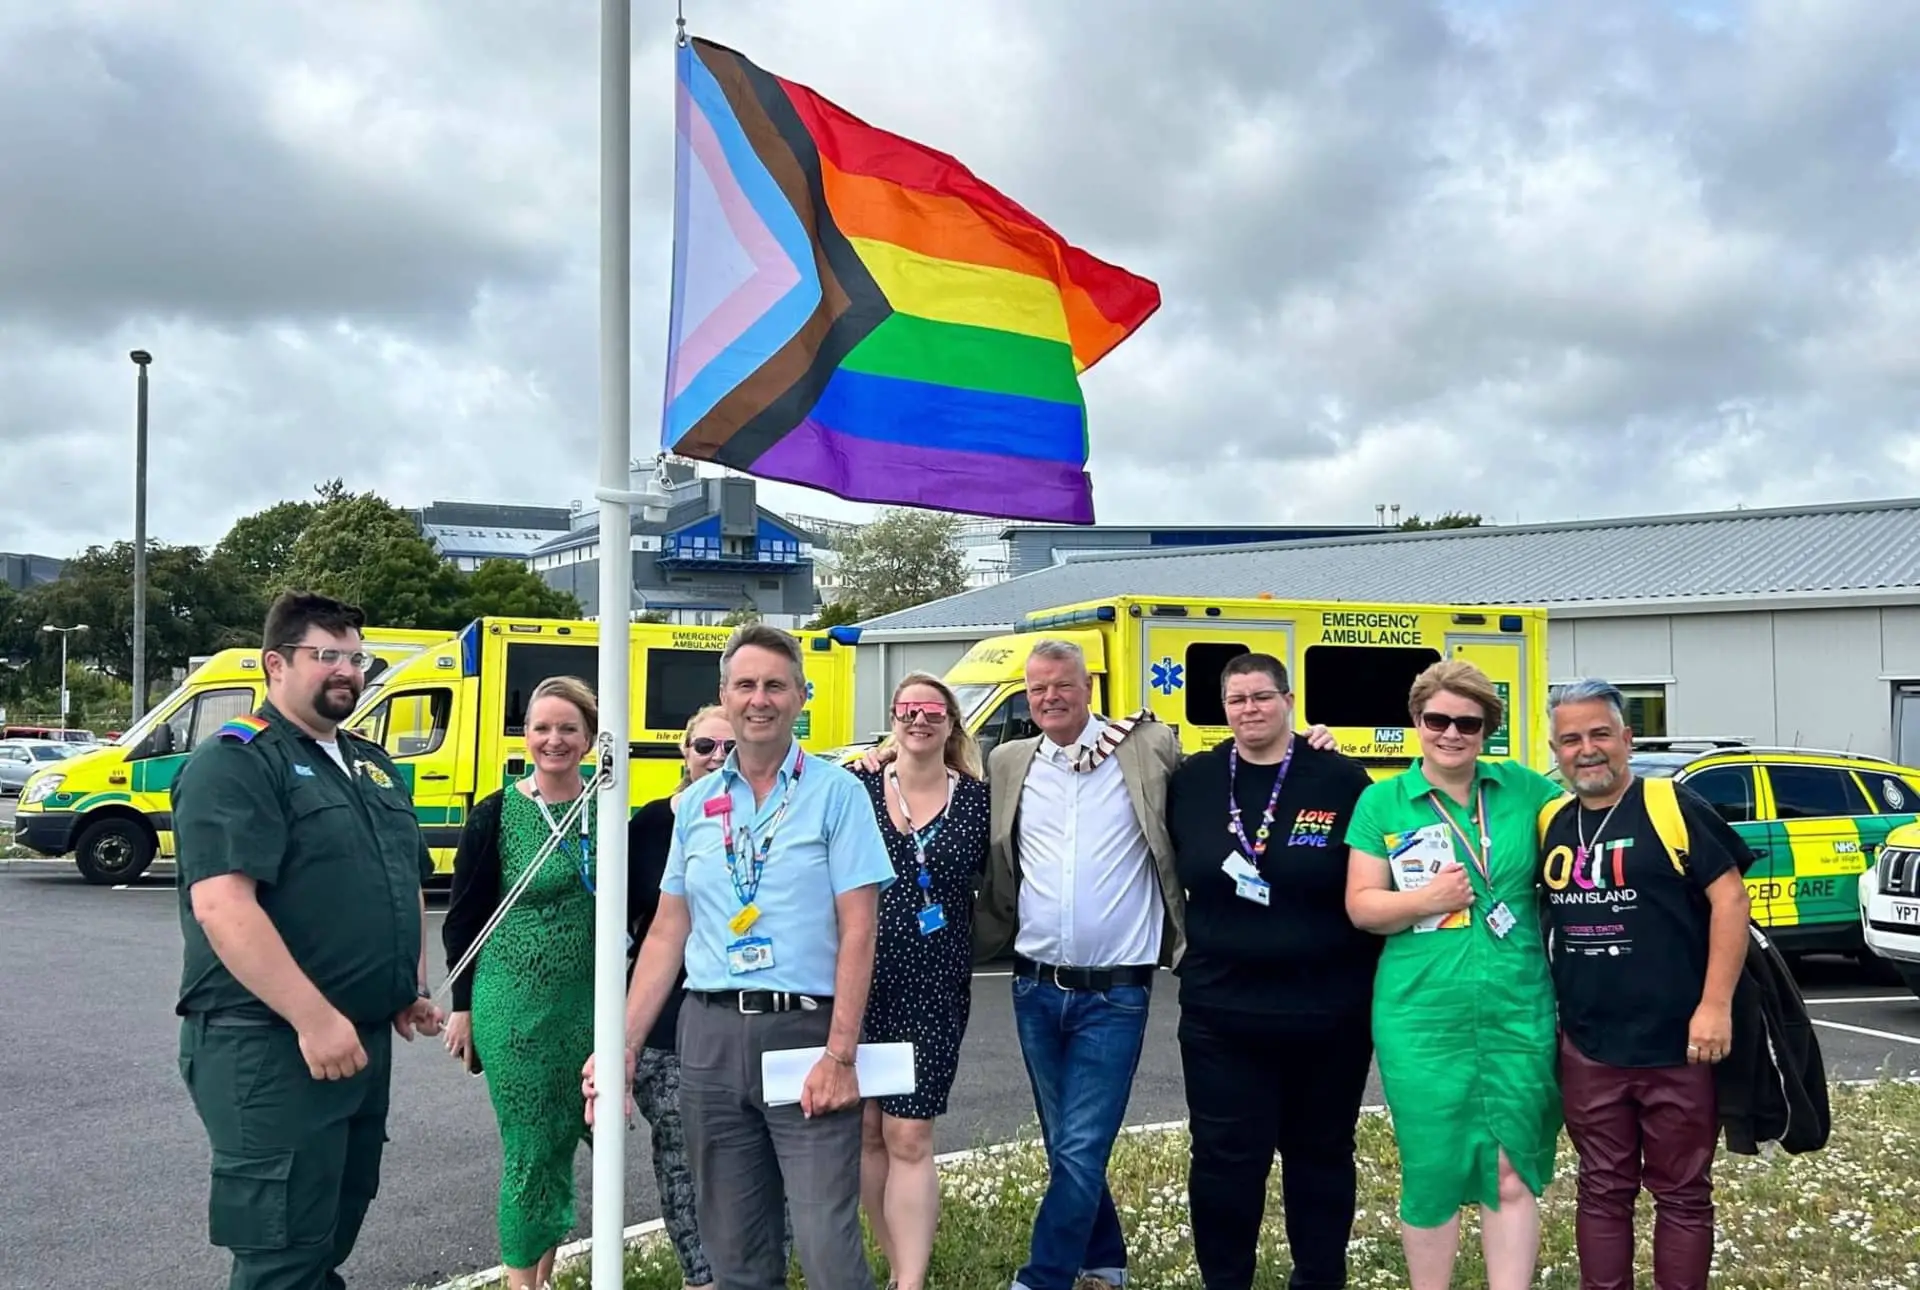 Karl Love and others at the Pride Flag raising for the Ambulance Service